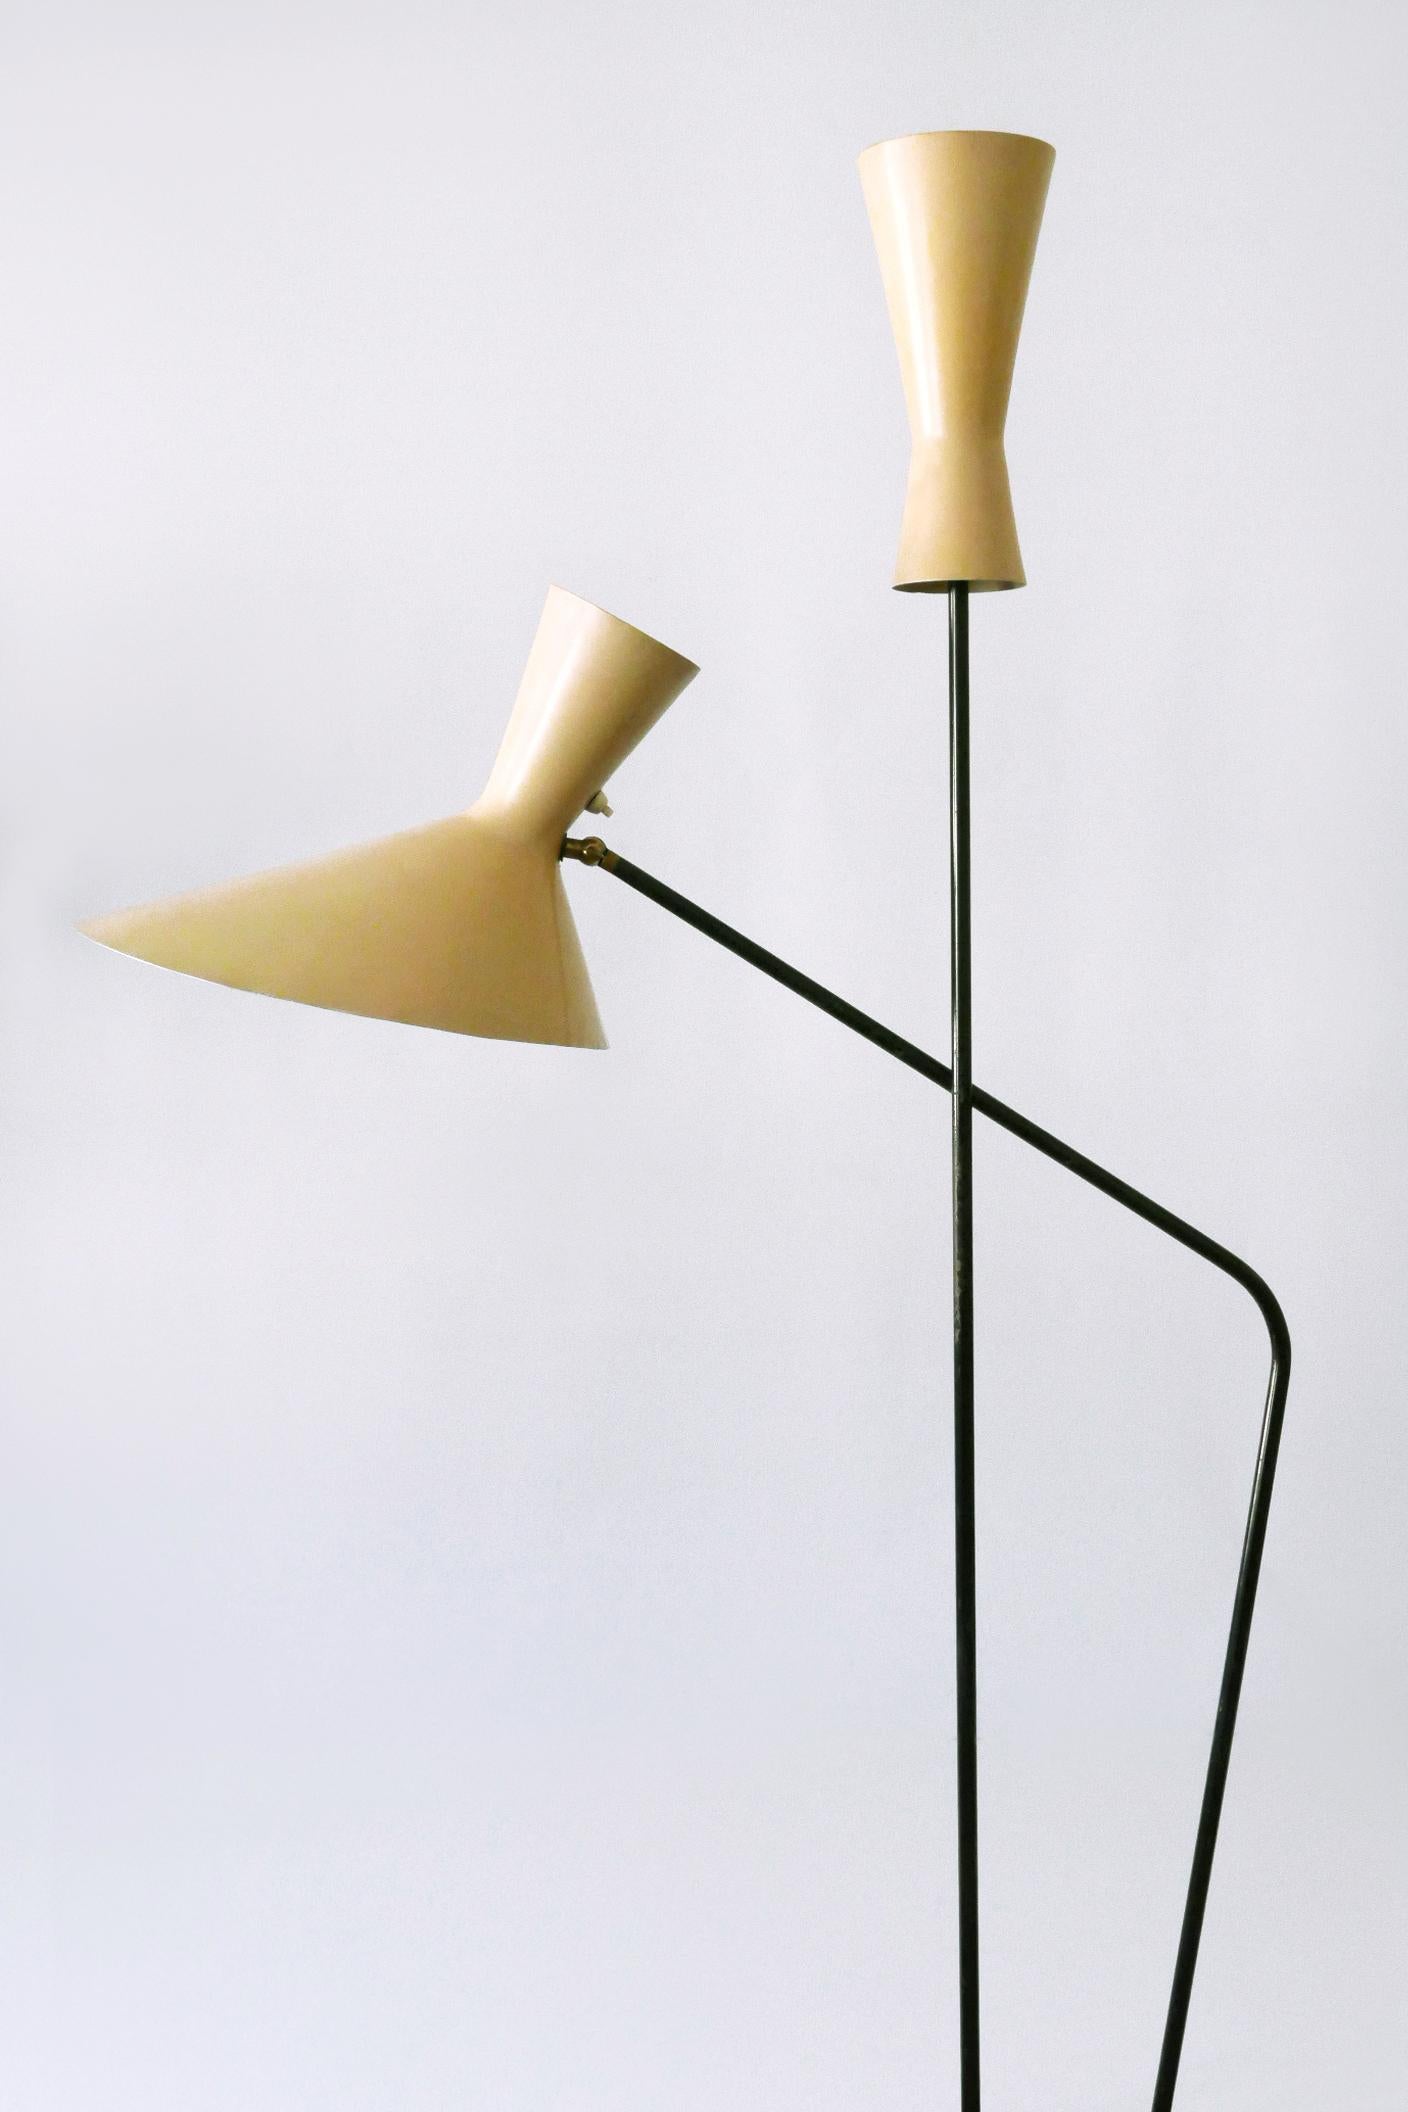 Mid-20th Century Rare Iconic Mid-Century Modern Floor Lamp by Prof. Carl Moor for BAG Turgi 1950s For Sale